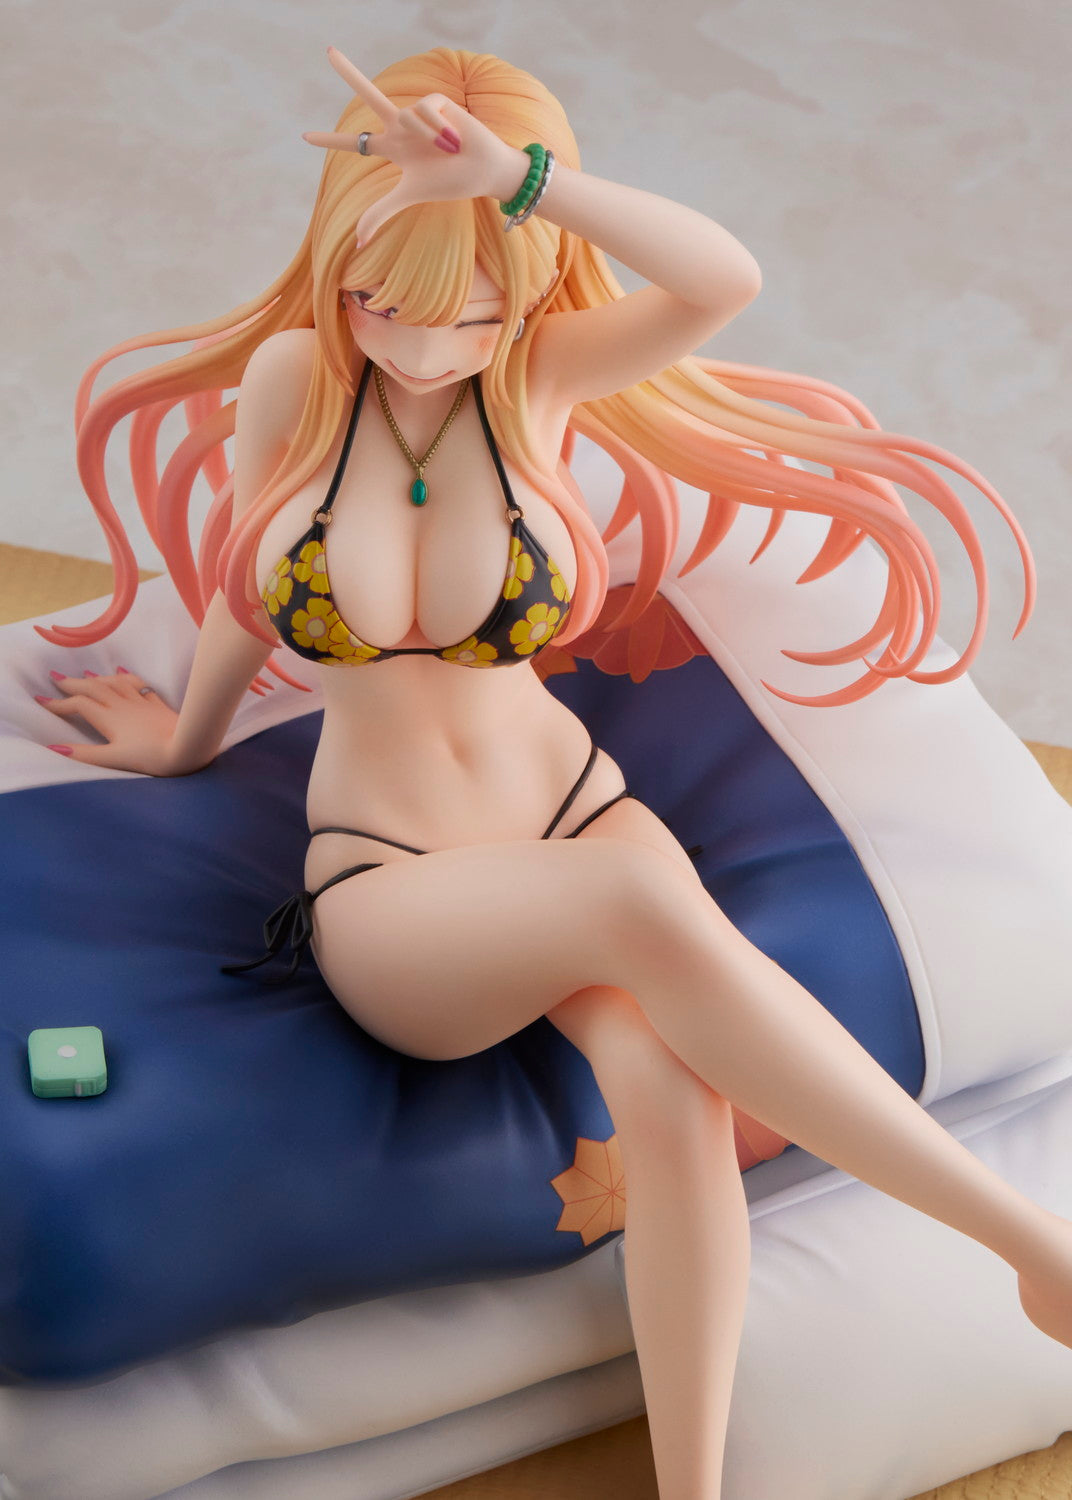 My Dress Up Darling - Marin Kitagawa 1/7 Scale Figure (Swimsuit Ver.) image count 7